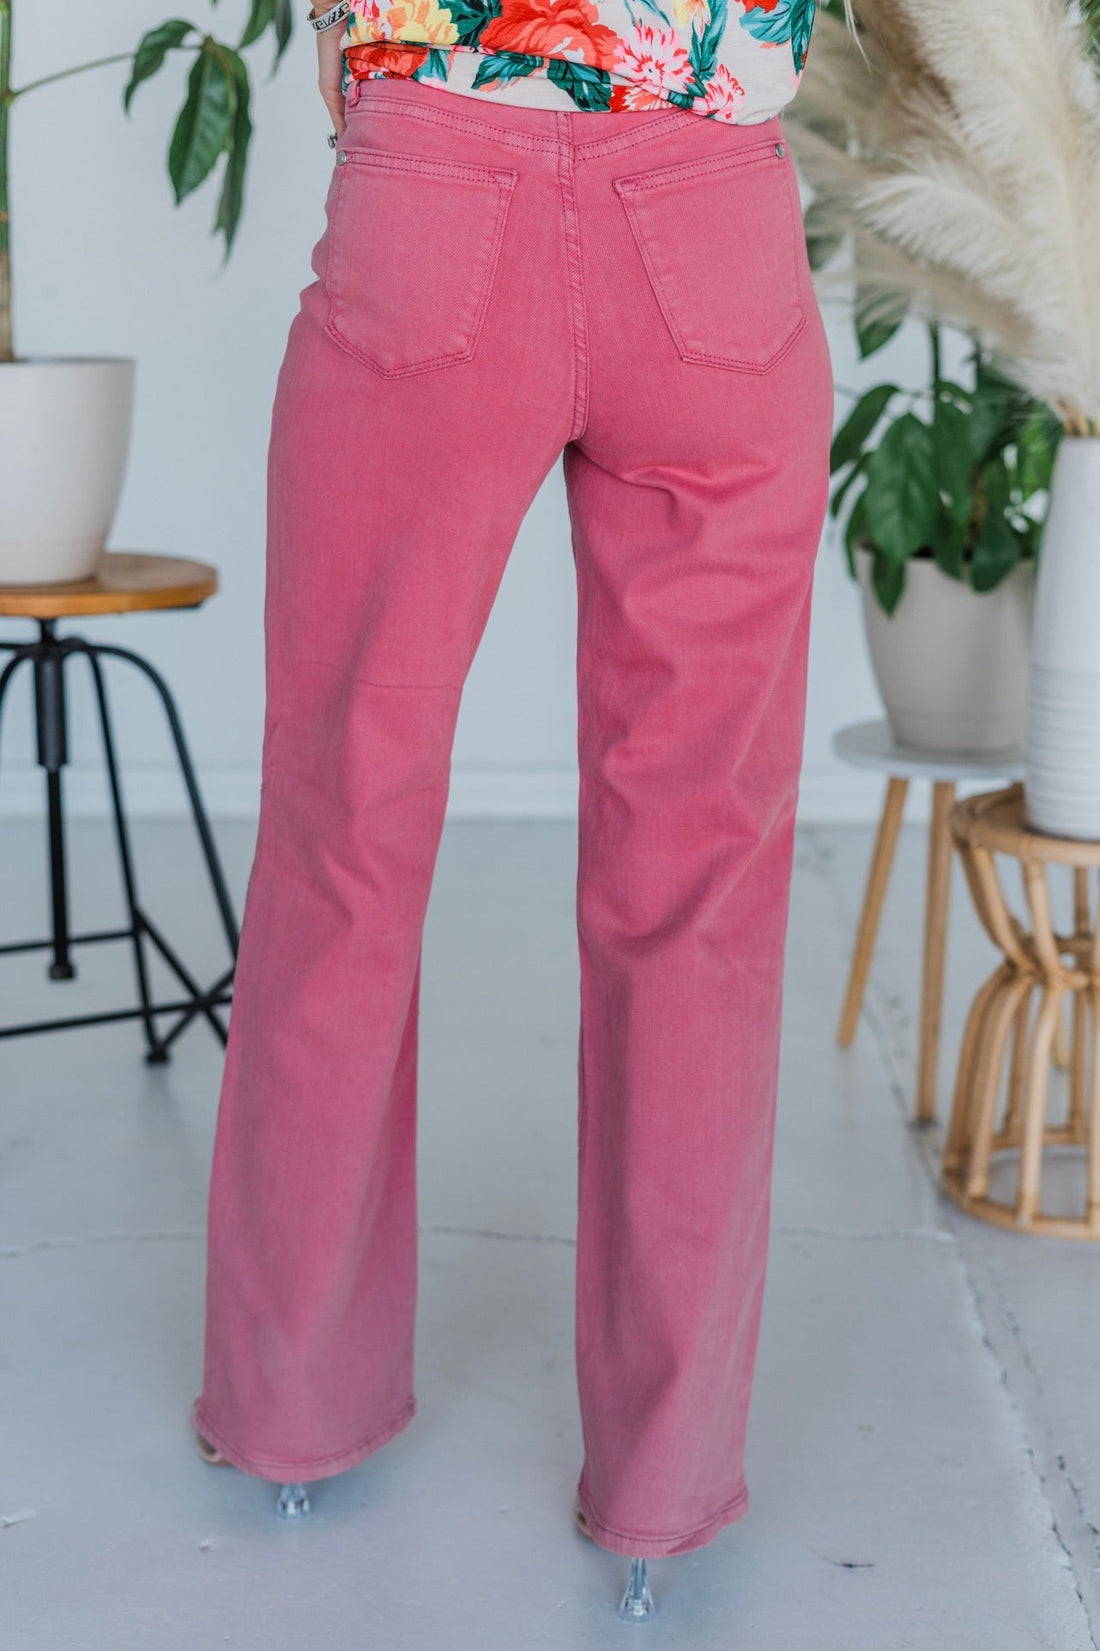 Judy Blue Dusty Pink High Waist Crochet Patches Wide Leg Jeans - Whiskey Skies - JUDY BLUE